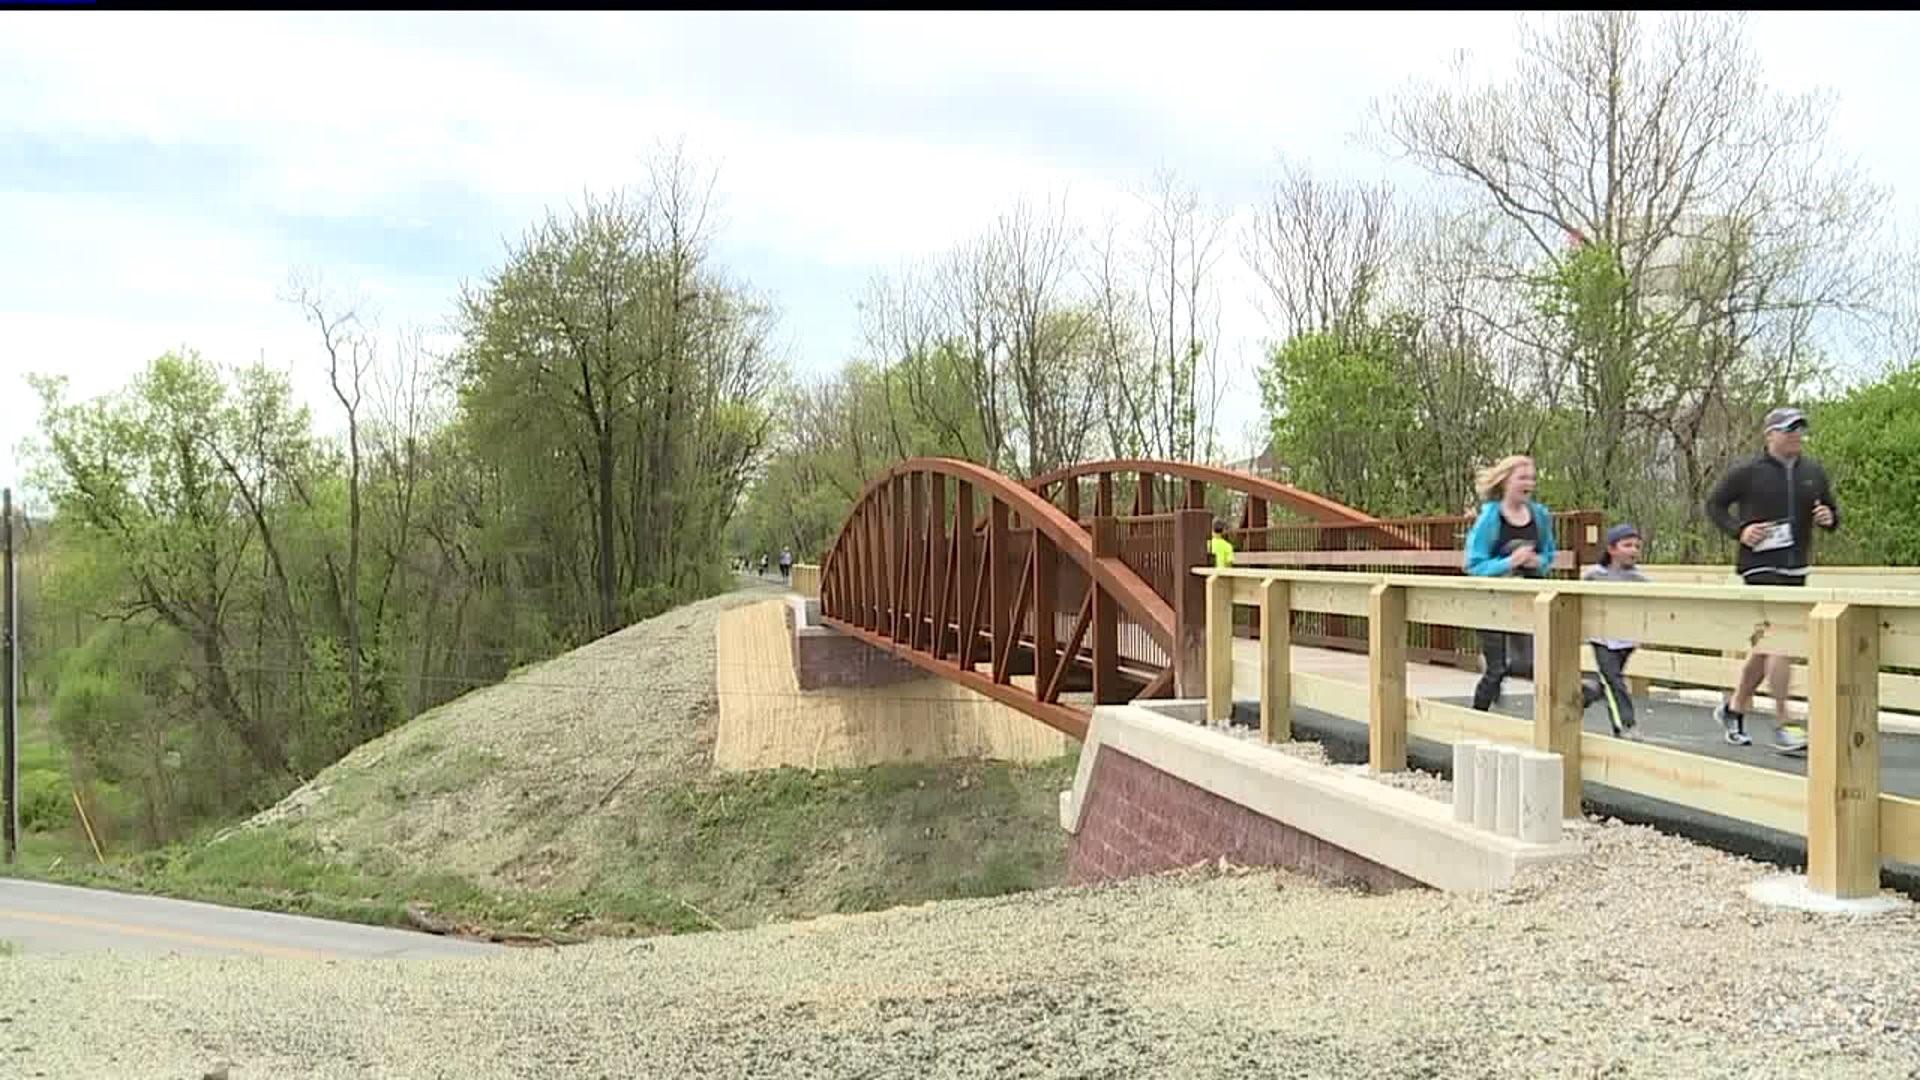 New Cumberland Valley Rail Trail bridge opens with ribbon cutting ceremony